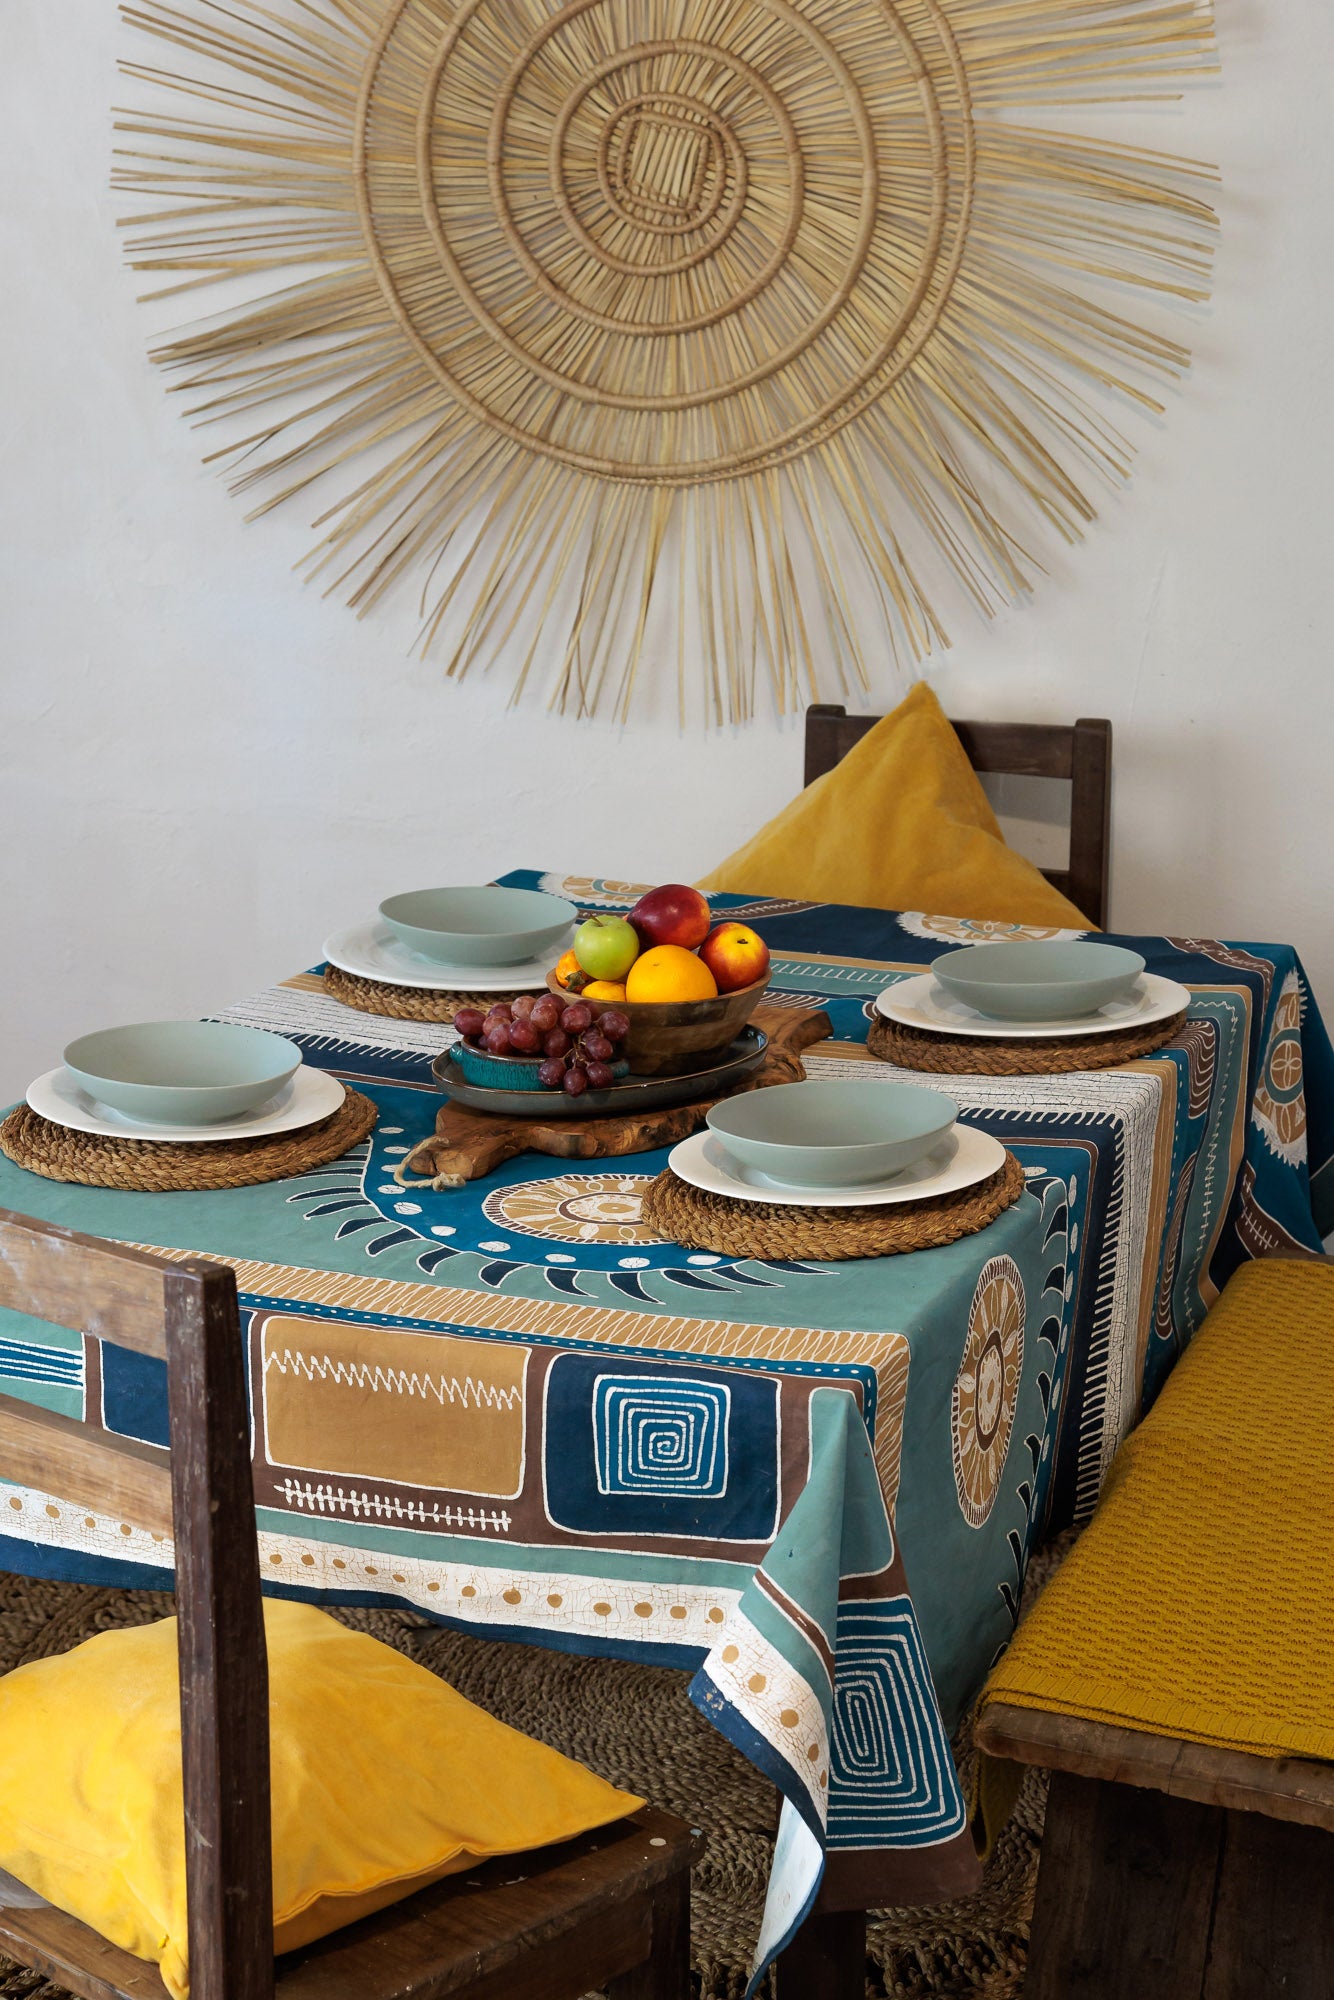 Mali Azure Tablecloth - Hand Painted by TRIBAL TEXTILES - Handcrafted Home Decor Interiors - African Made